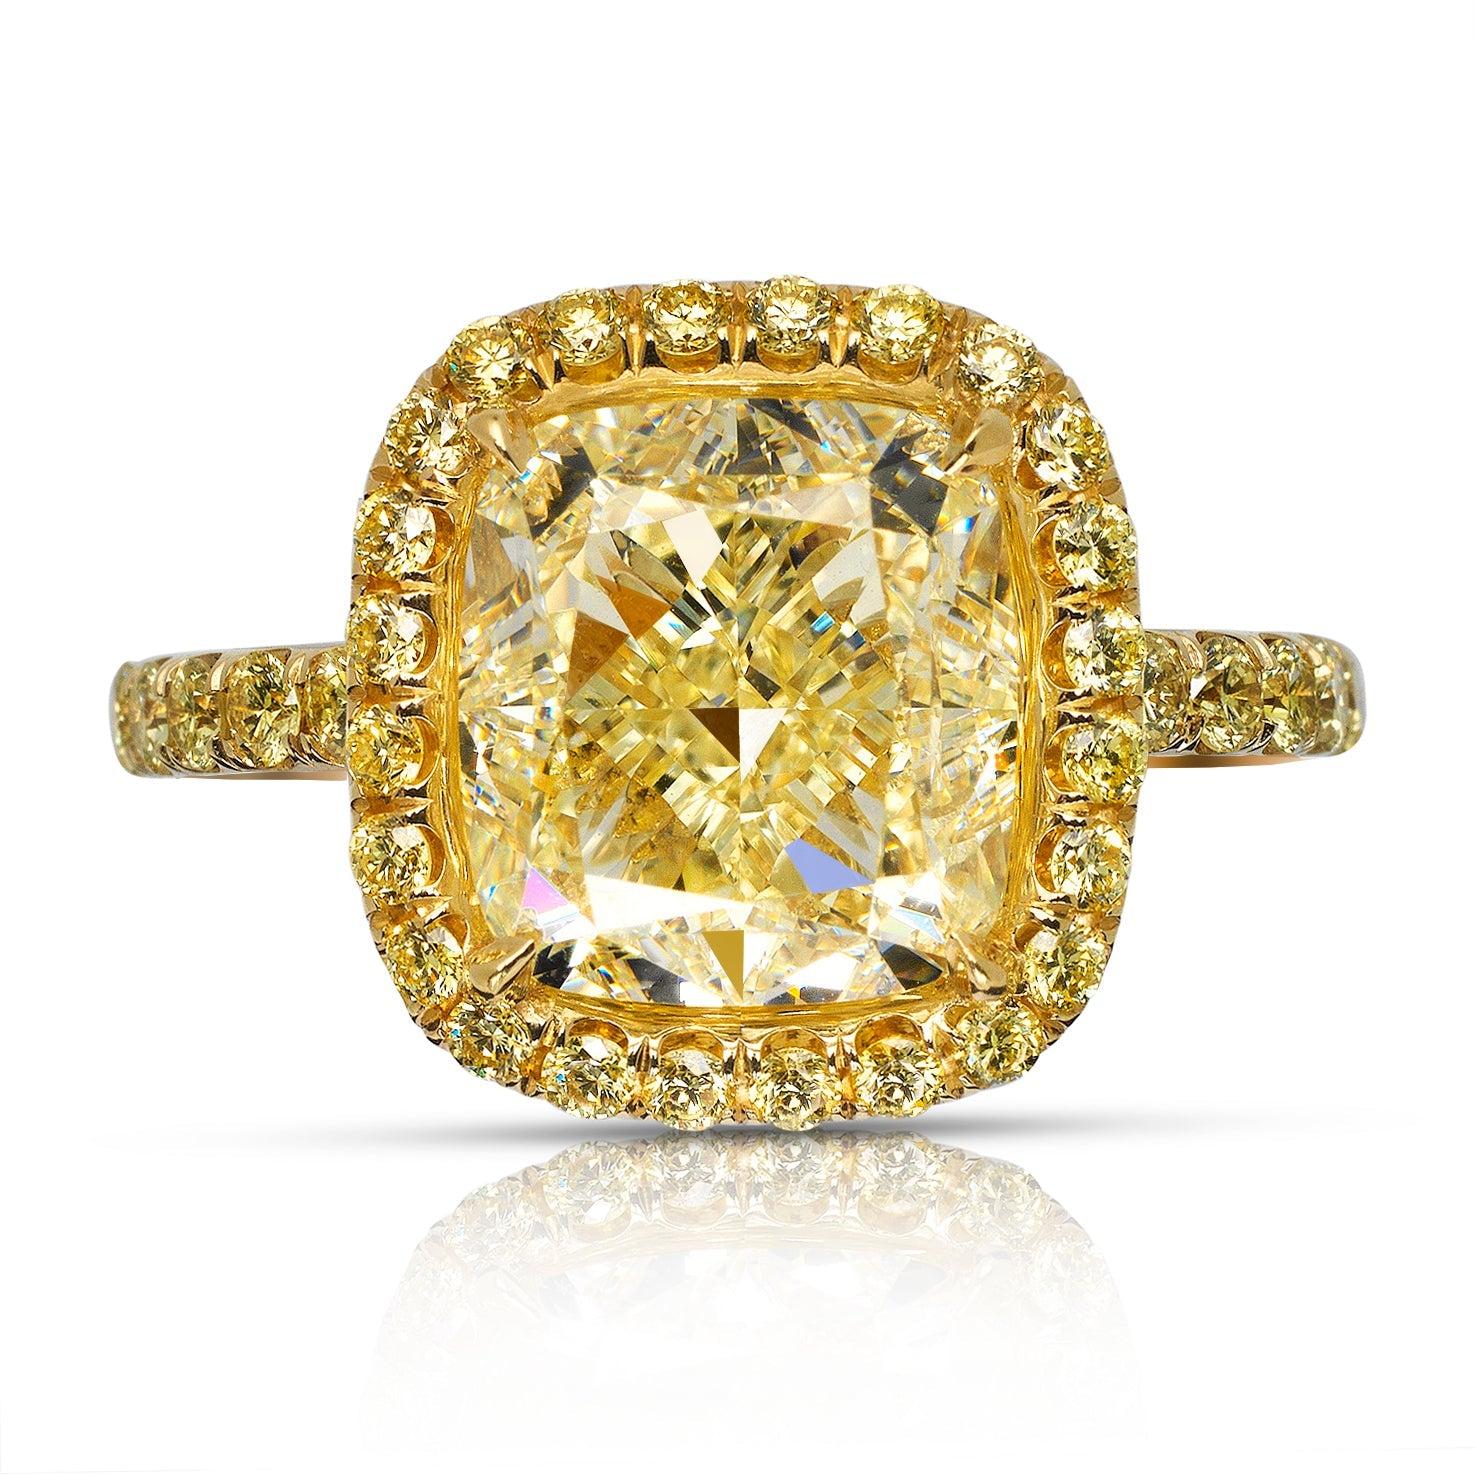 TASHE YELLOW DIAMOND ENGAGEMENT RING 18K BY MIKE NEKTA
 
Center Diamond:
Carat Weight: 5 Carats
Color:  Y TO Z RANGE 
Clarity: VVS2
Style:  CUSHION MODIFIED BRILLIANT
Approximate Measurements:  9.3 x 8.9 x 6.4 mm 
 
Ring:
Metal: 18K GOLD
Metal